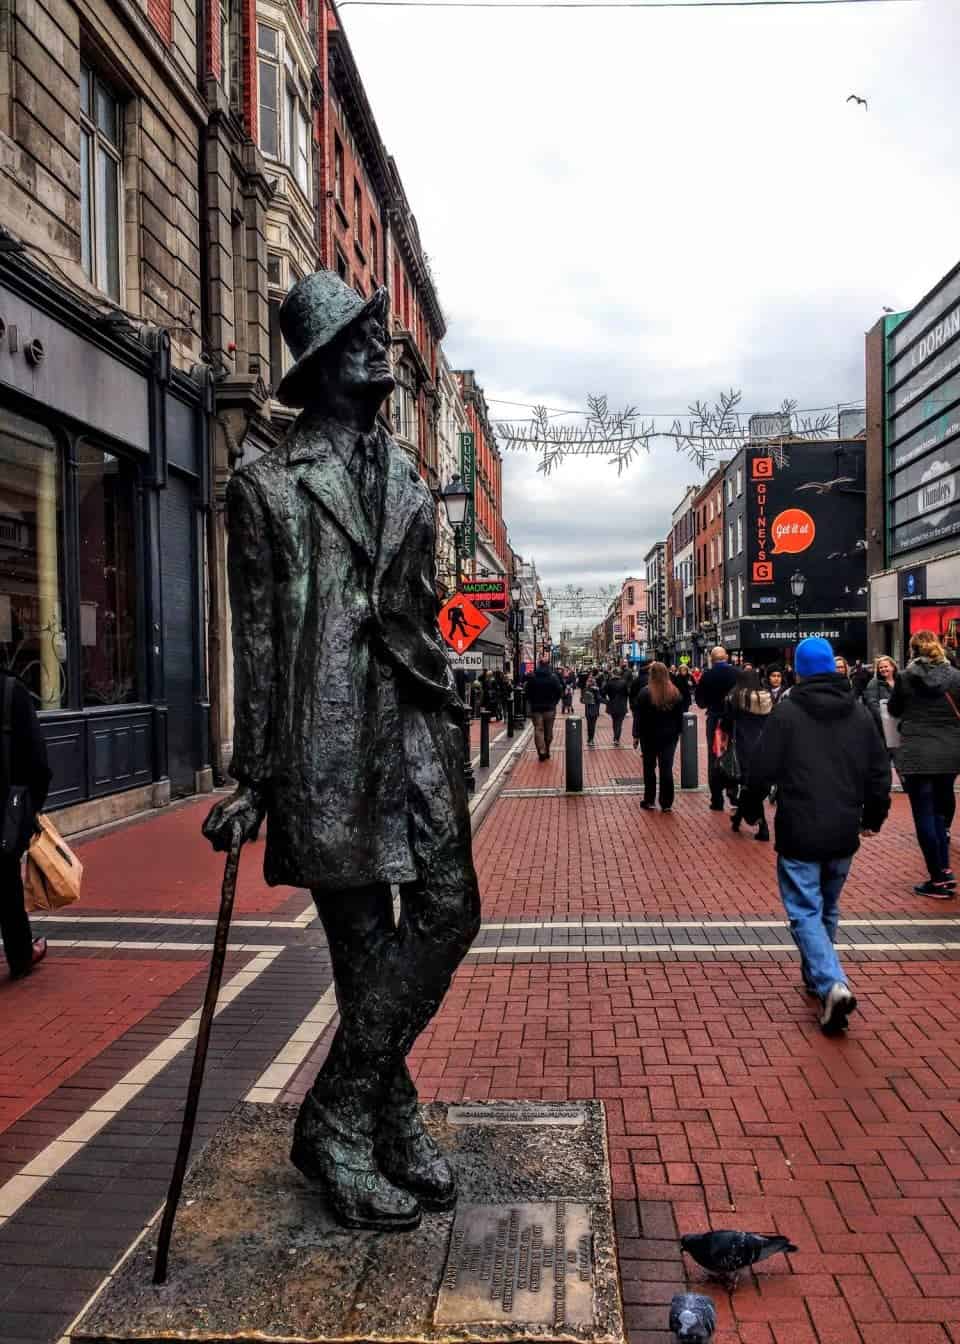 things to do in Dublin check out the street art, statues and graffiti